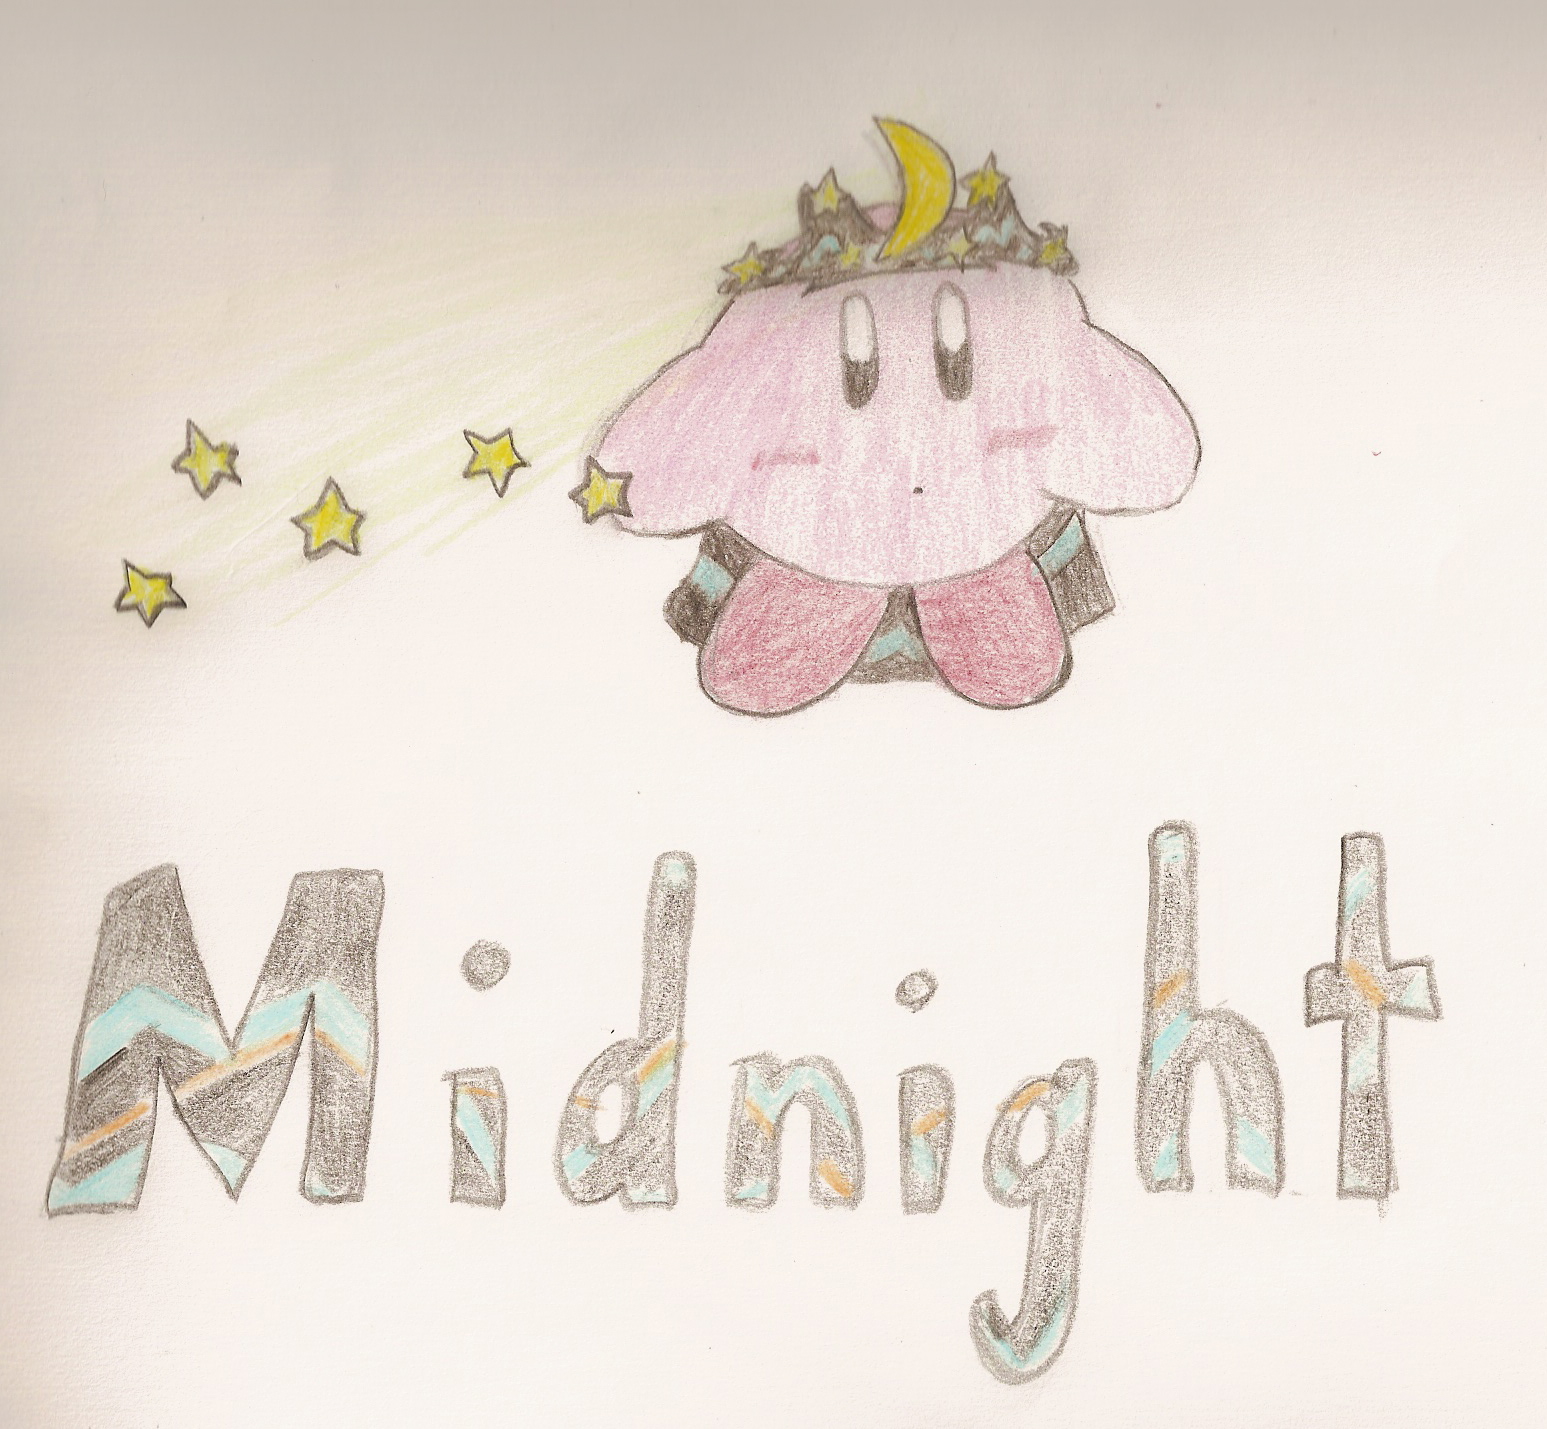 Kirby: Midnight Power(for ali32's Kirby Ability Contest) by SapphirePaint